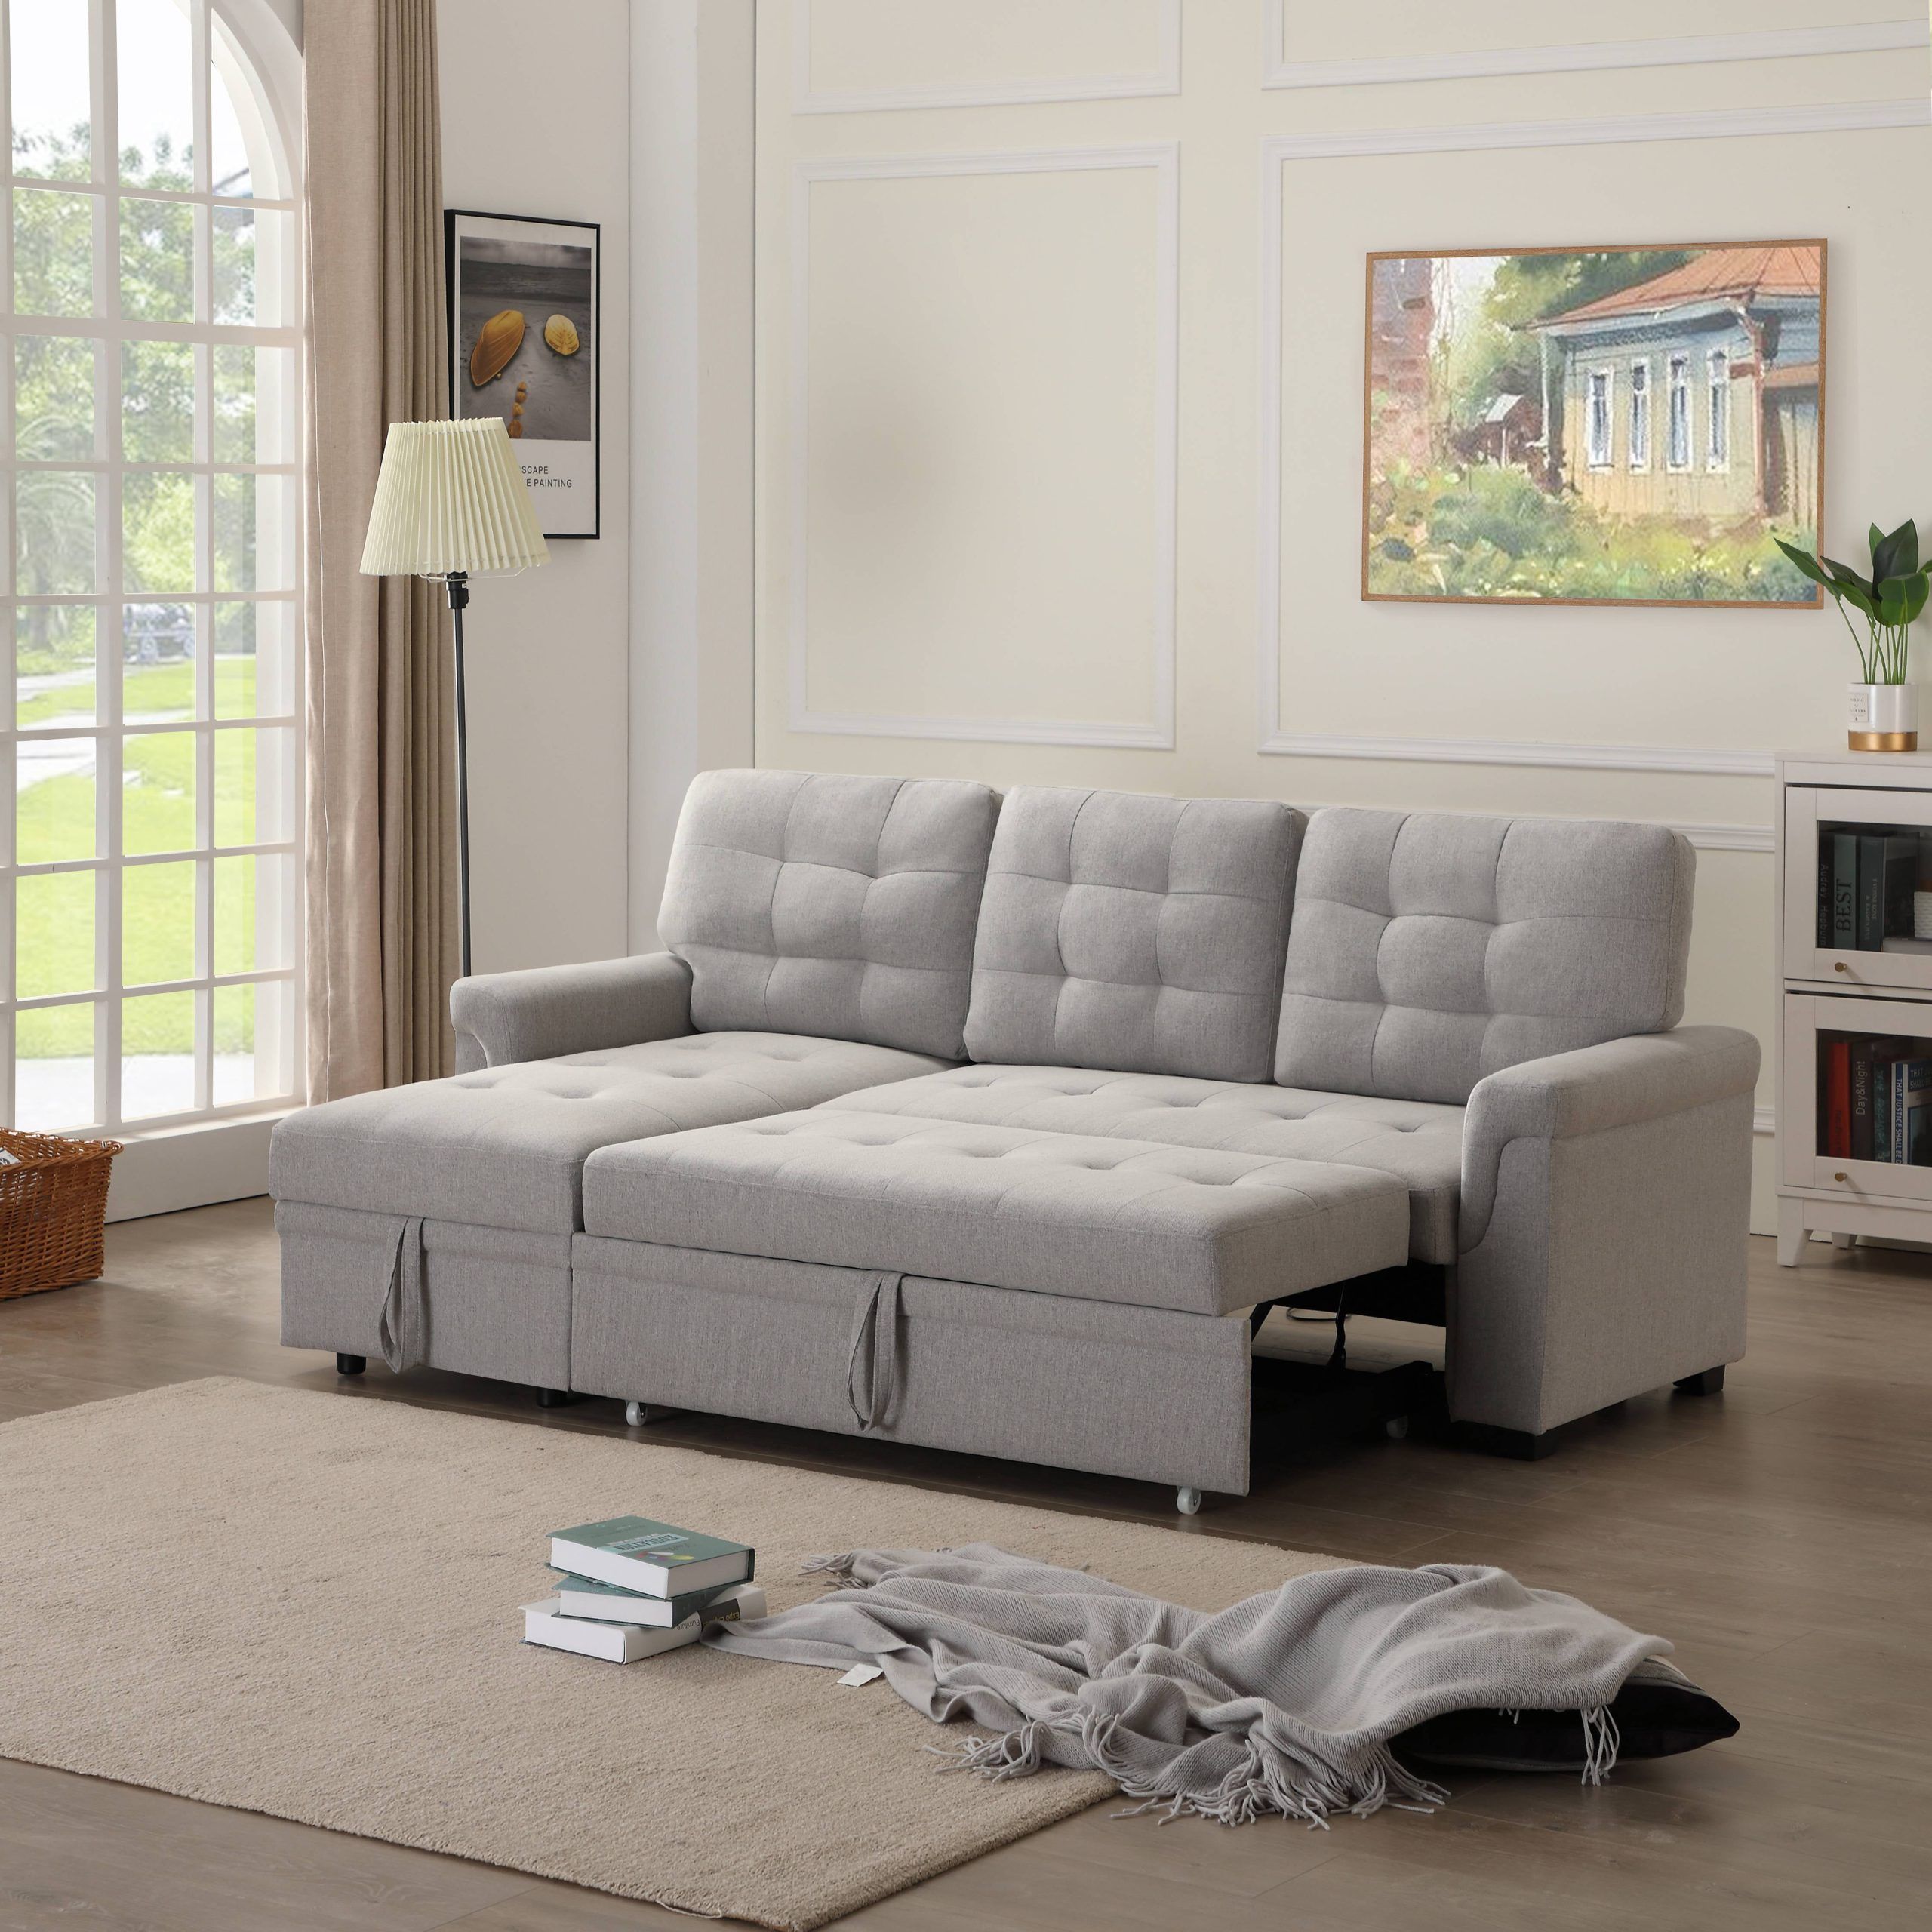 Popular Modern Sleeper Sectional Sofa With Fold Out Twin Size Sleeper, 33'' X Within 3 In 1 Gray Pull Out Sleeper Sofas (View 13 of 15)